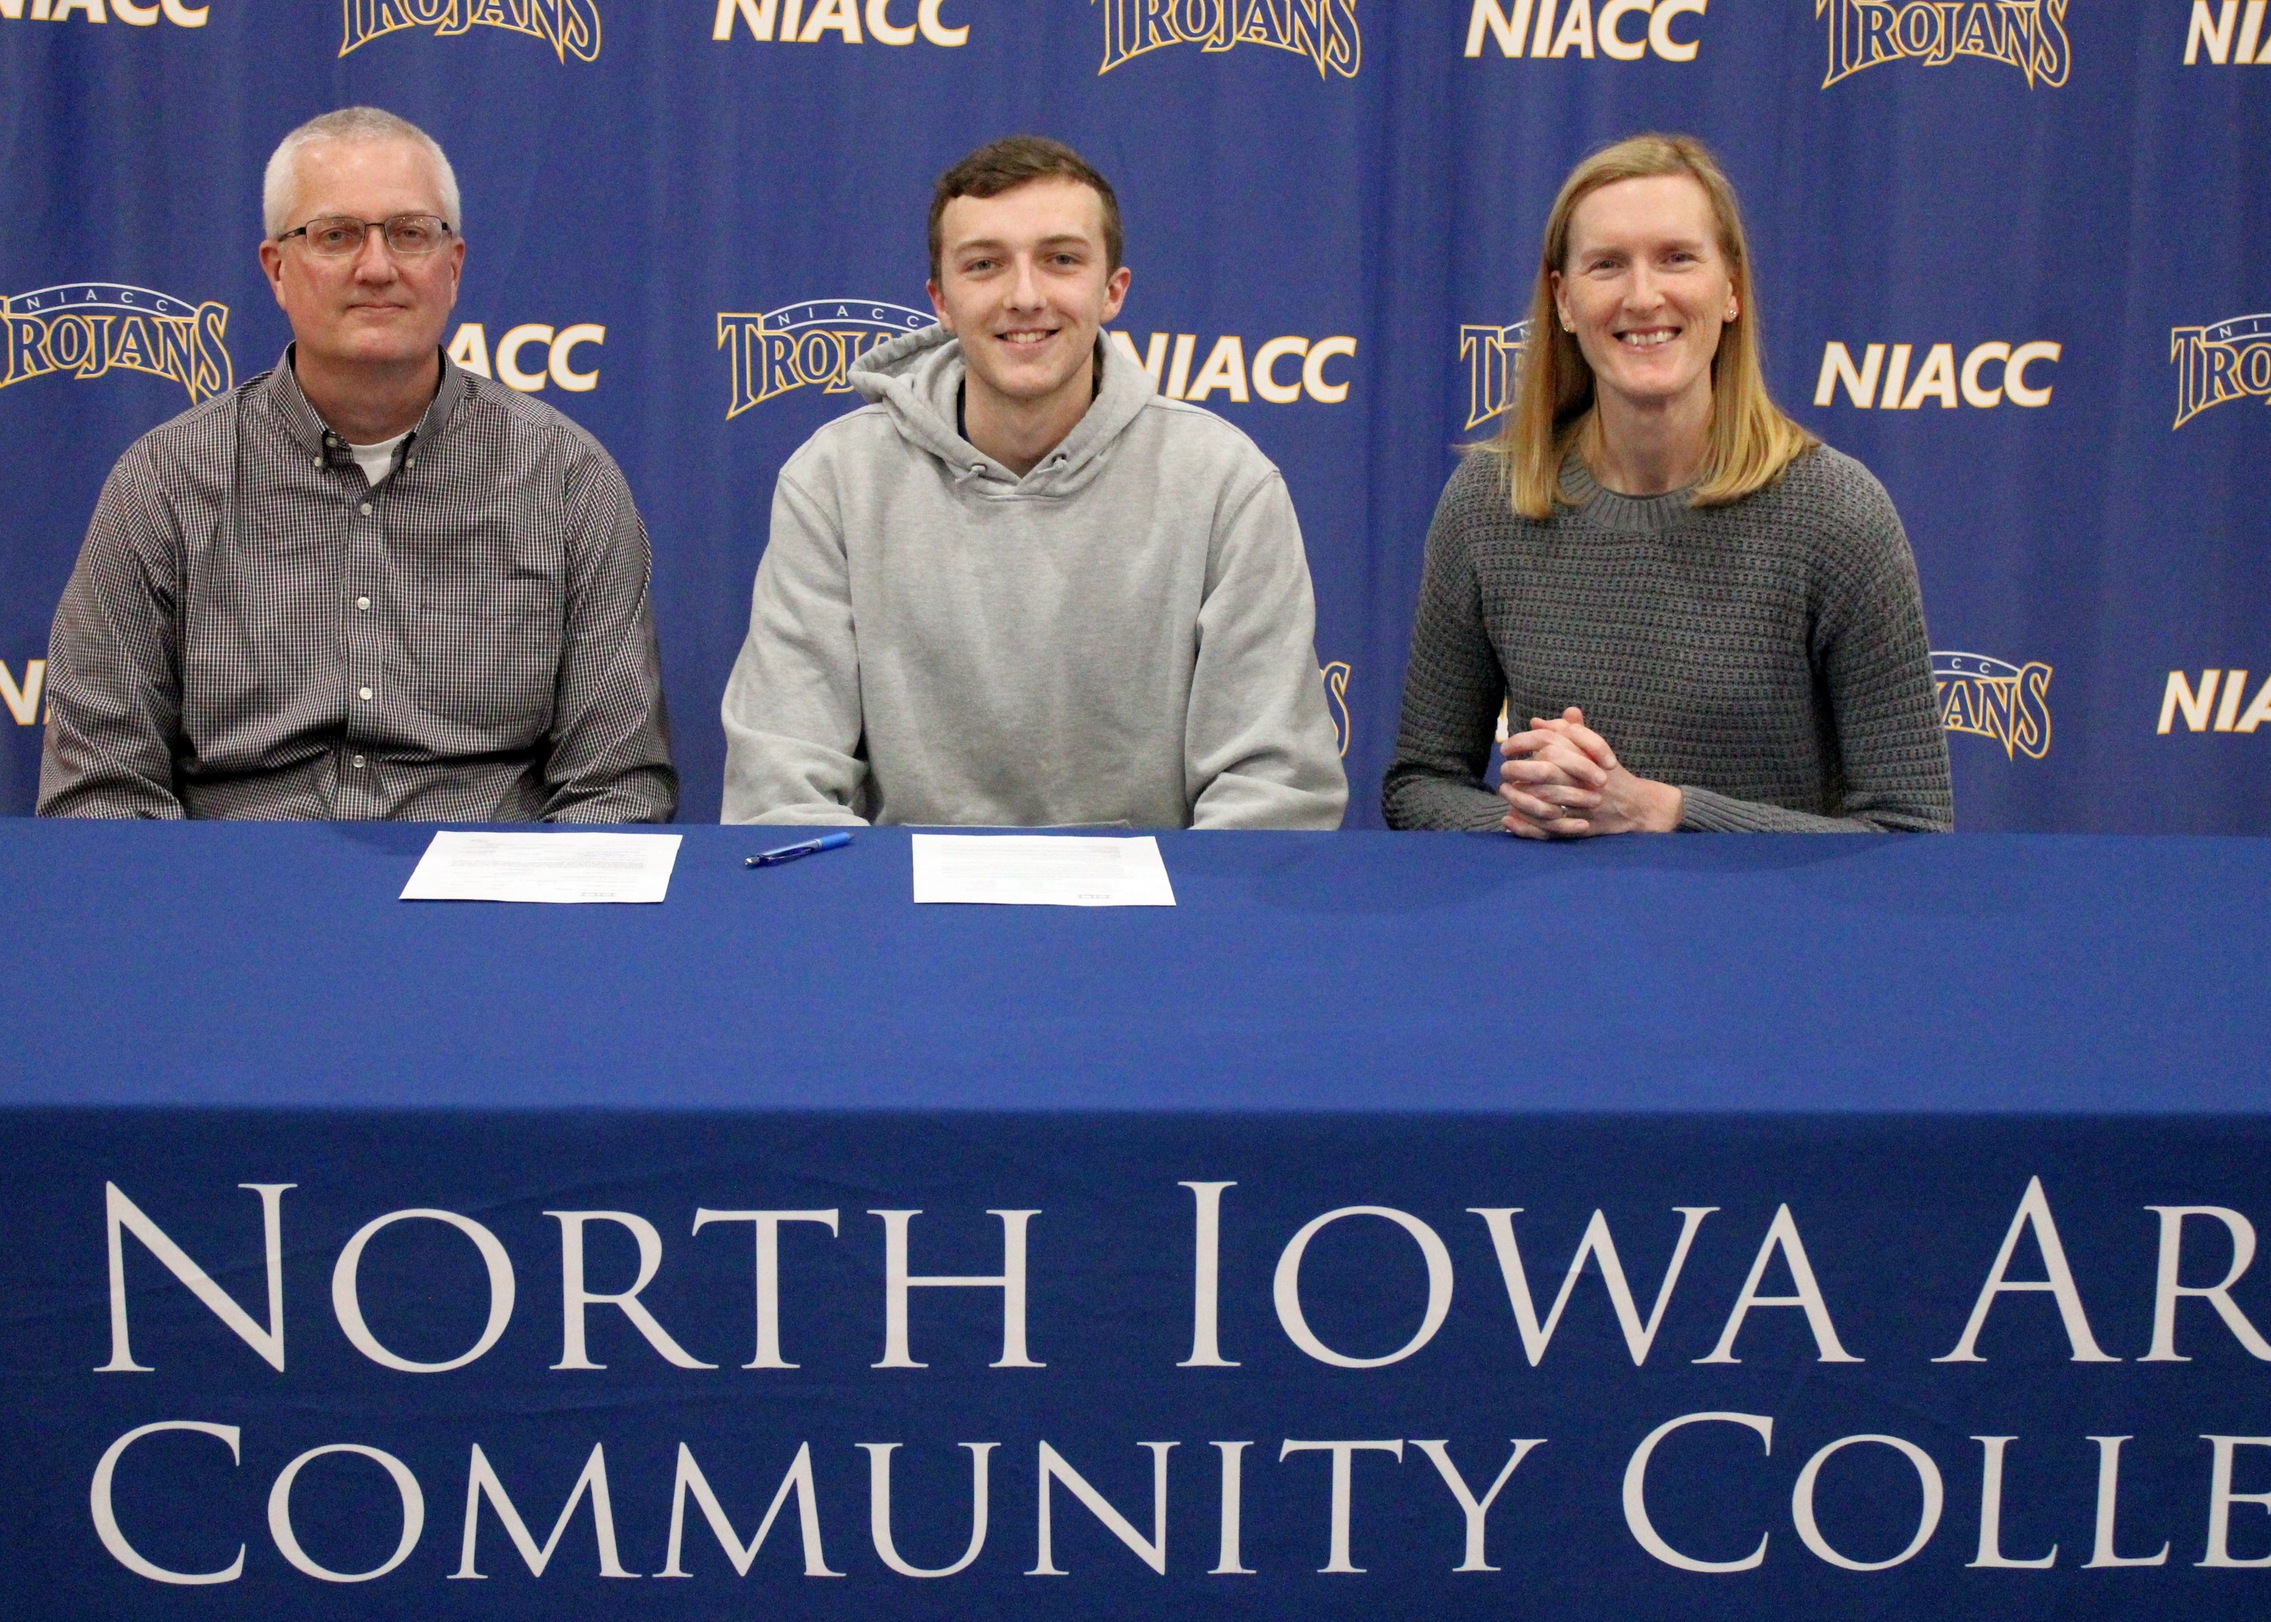 NIACC's Bradley Andrews signs national letter of intent Friday with Truman State University.